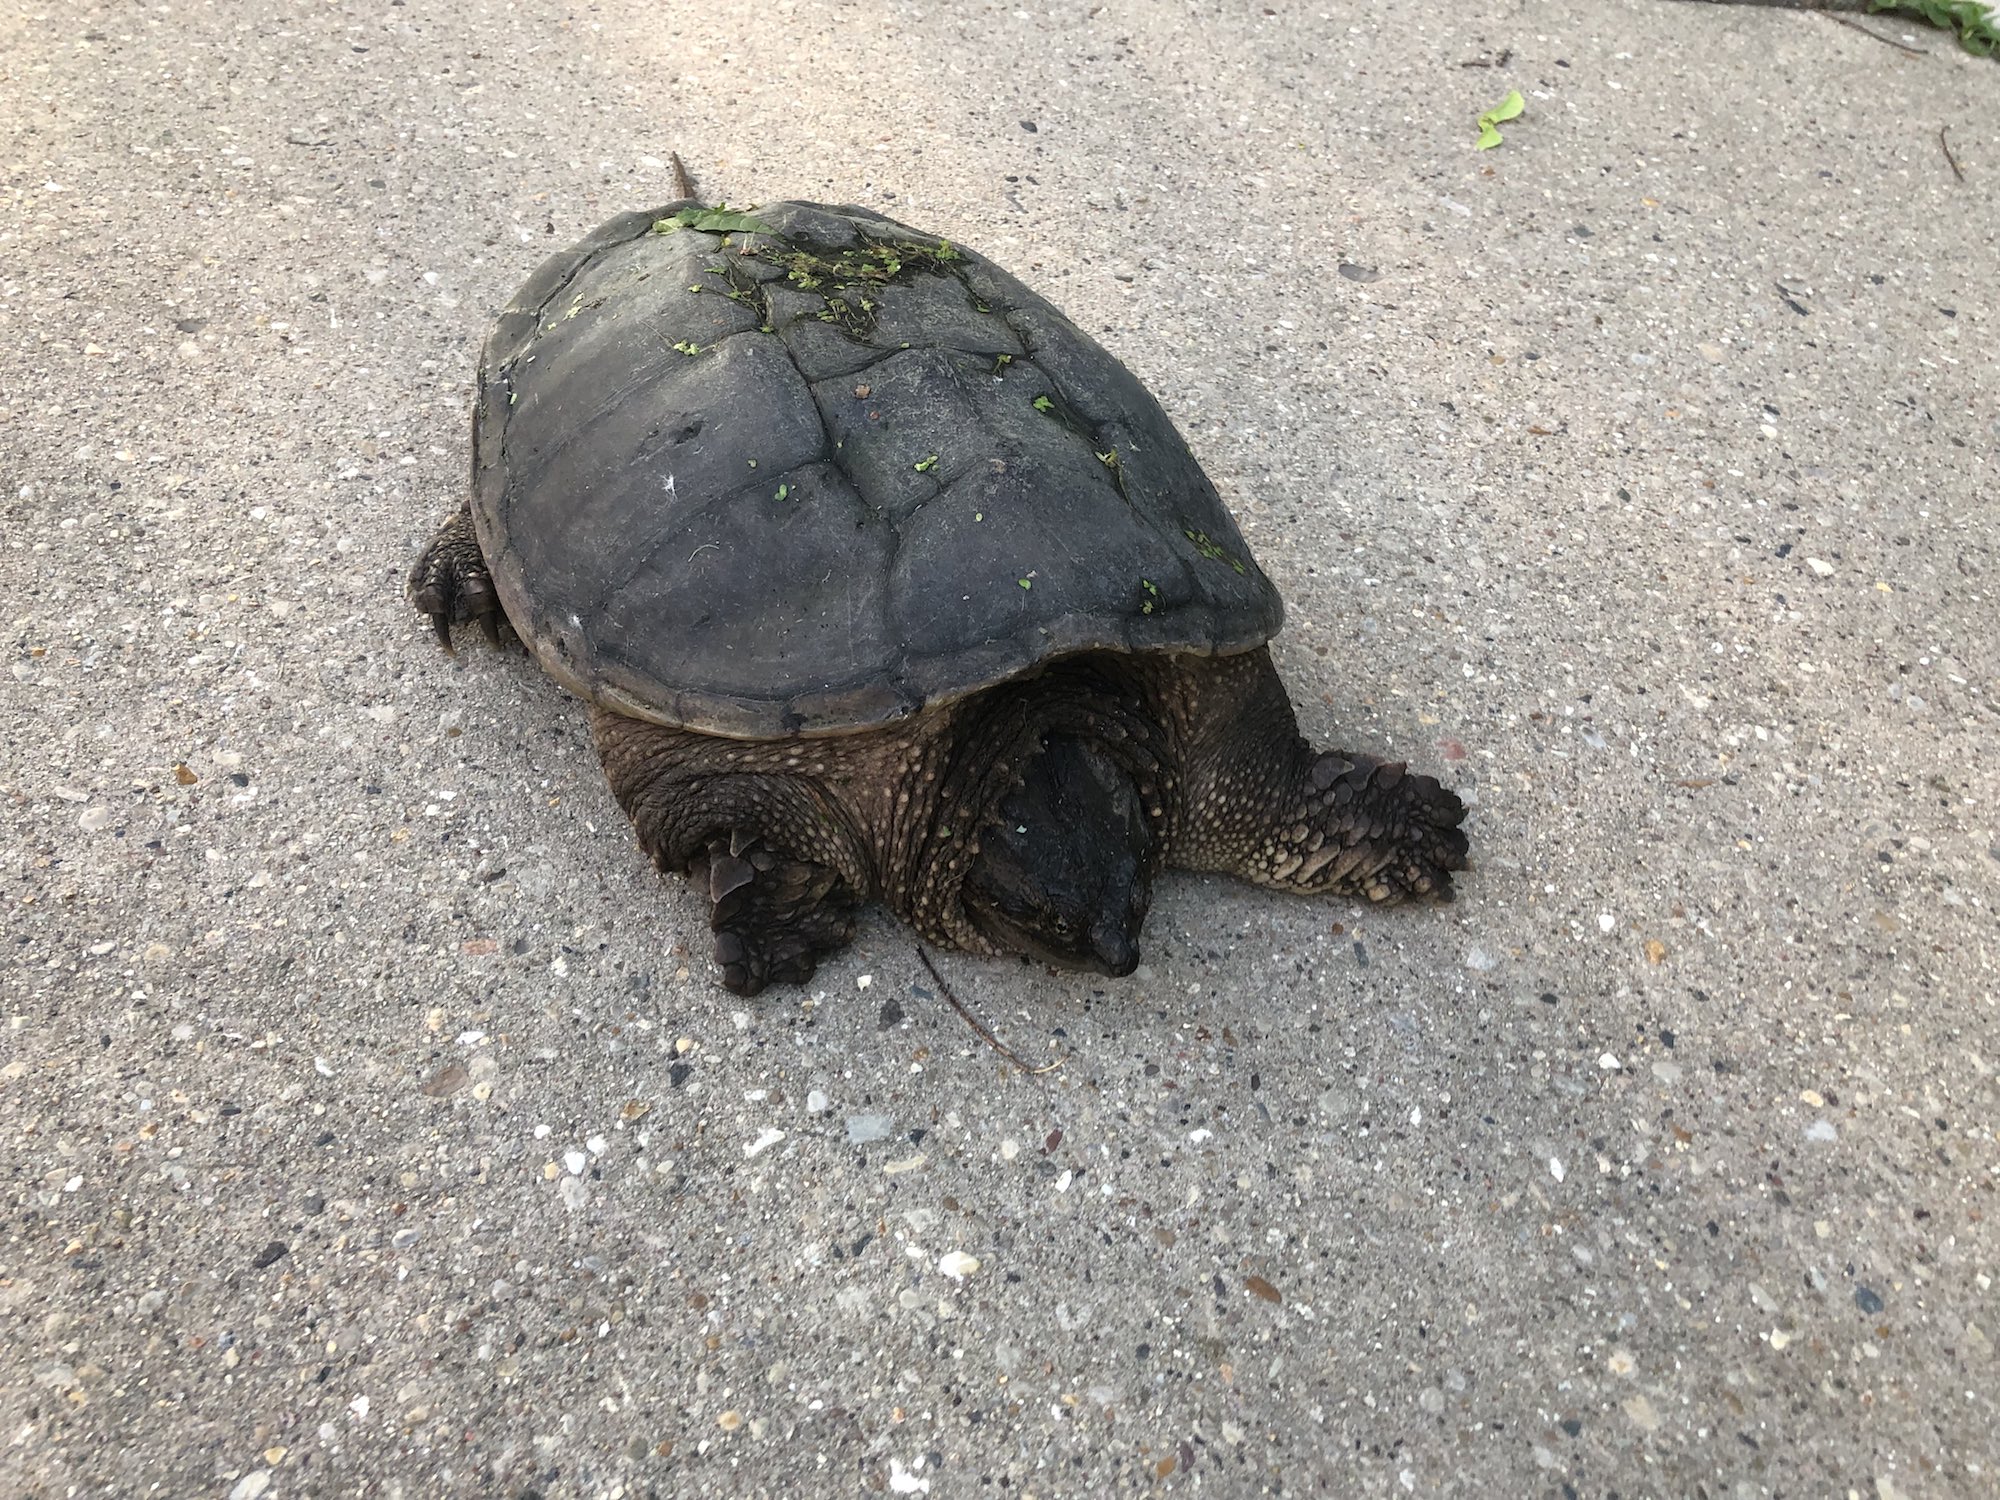 Snapping Turtle walking on sidewalk along Arbor Drive in Madison, Wisconsin on June 15, 2019.